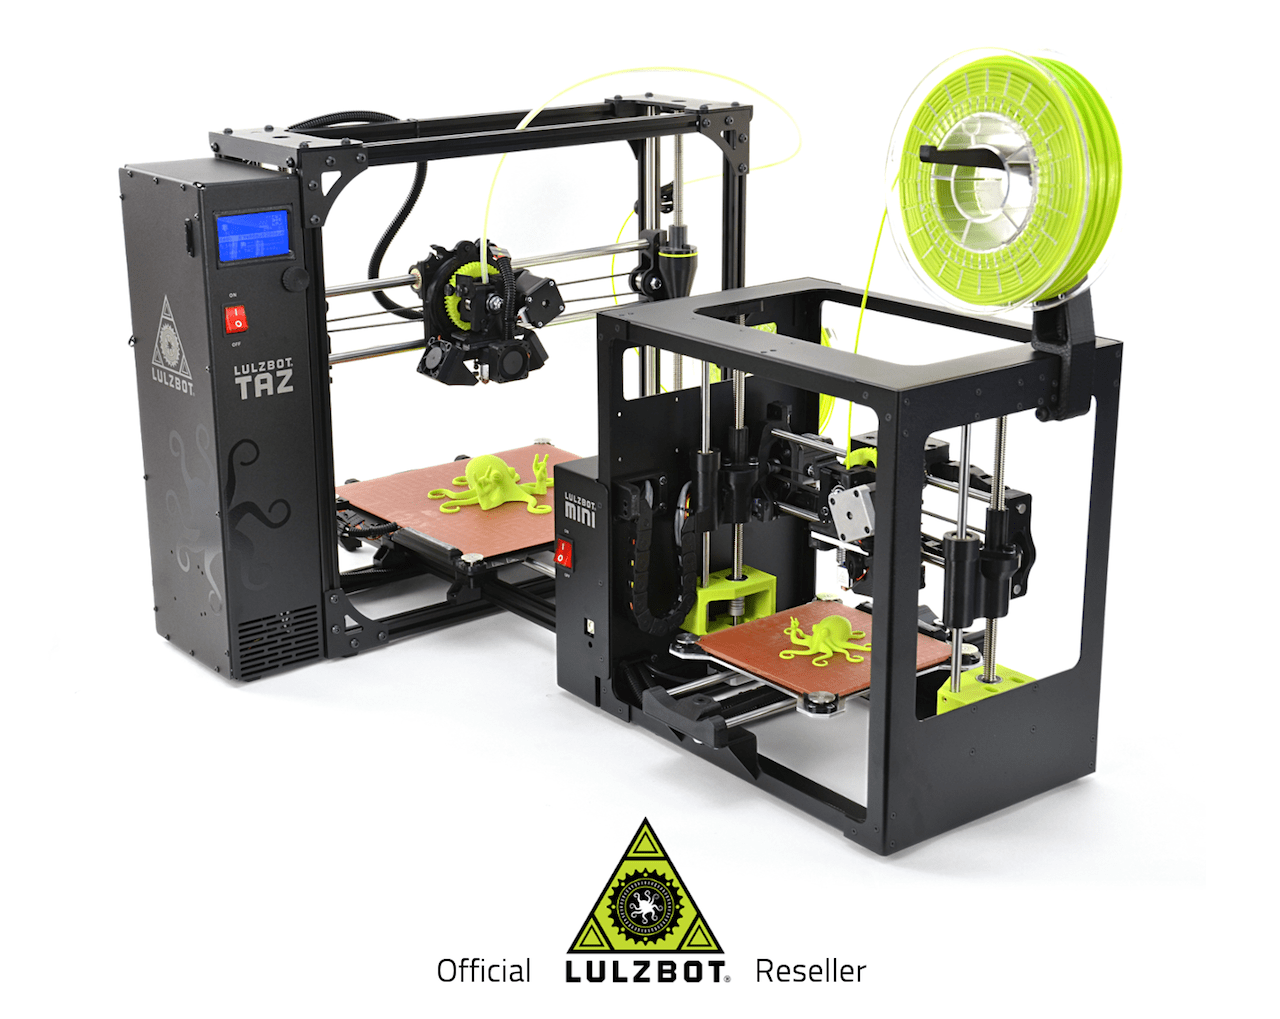  LulzBot 3D printers now being sold by colorFabb?  